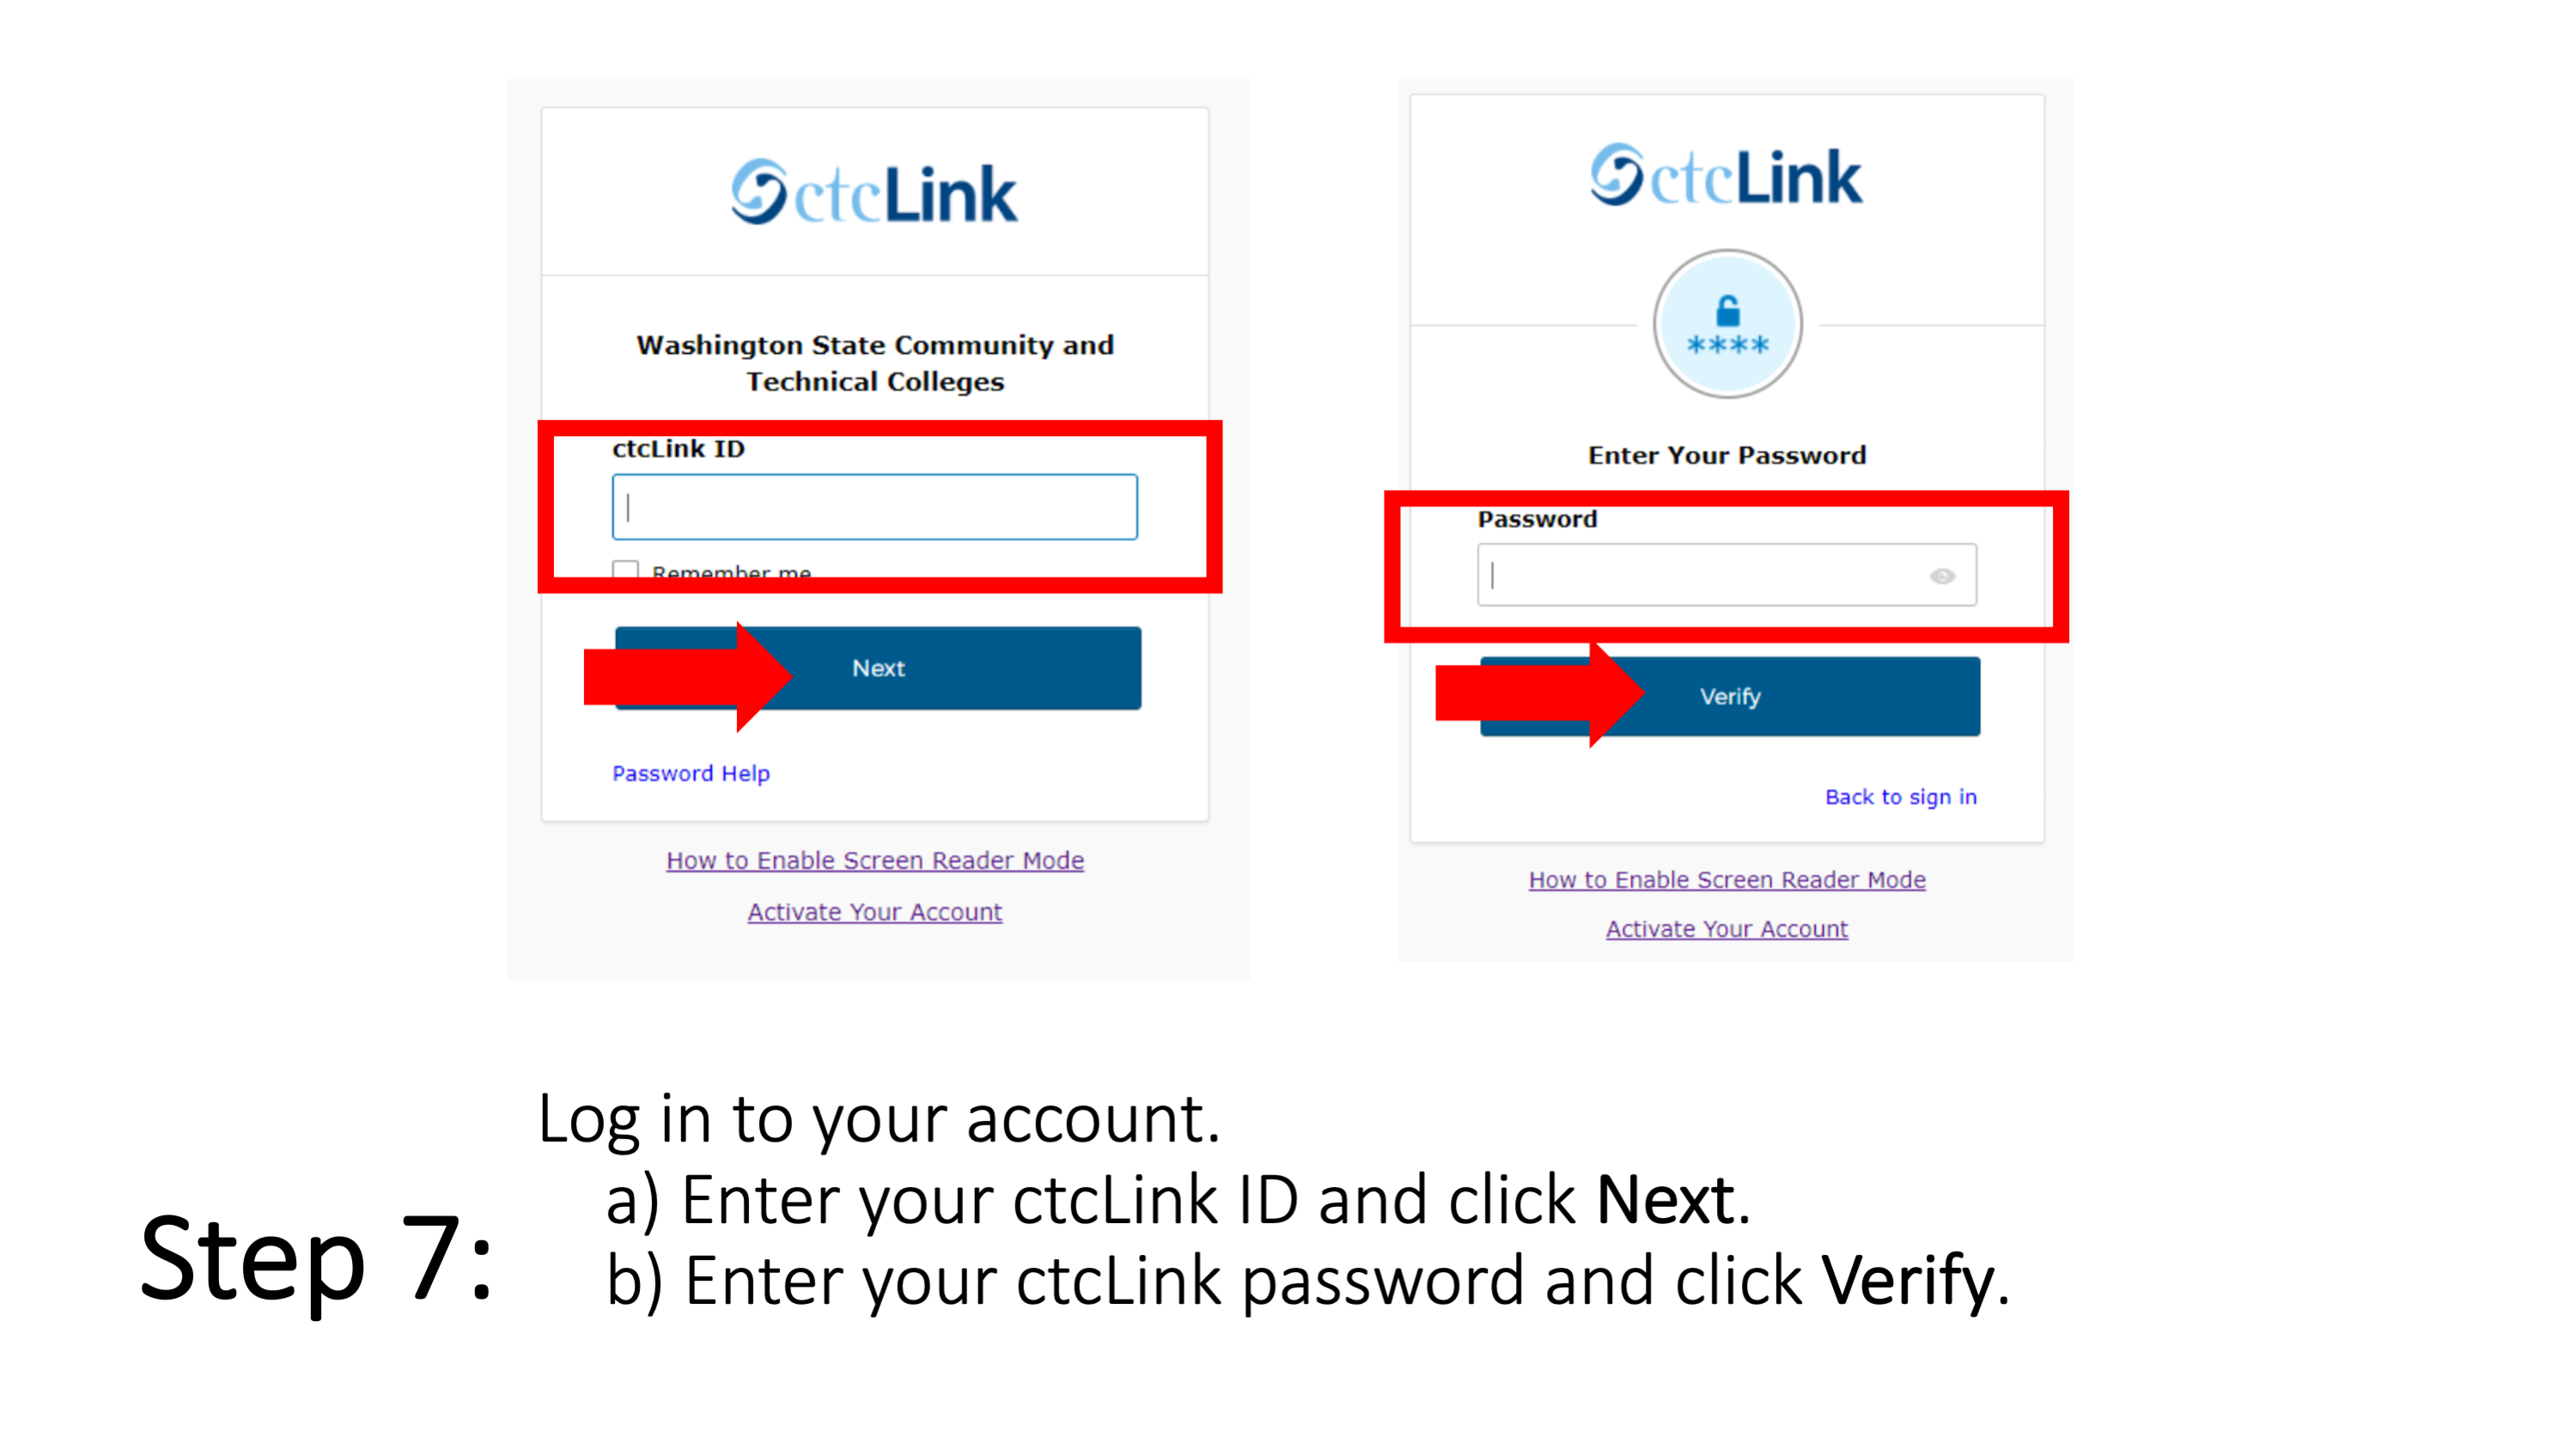 Step 7: Log in to your account. a) Enter your ctcLink ID and click Next. b) Enter your ctcLink password and click Verify.